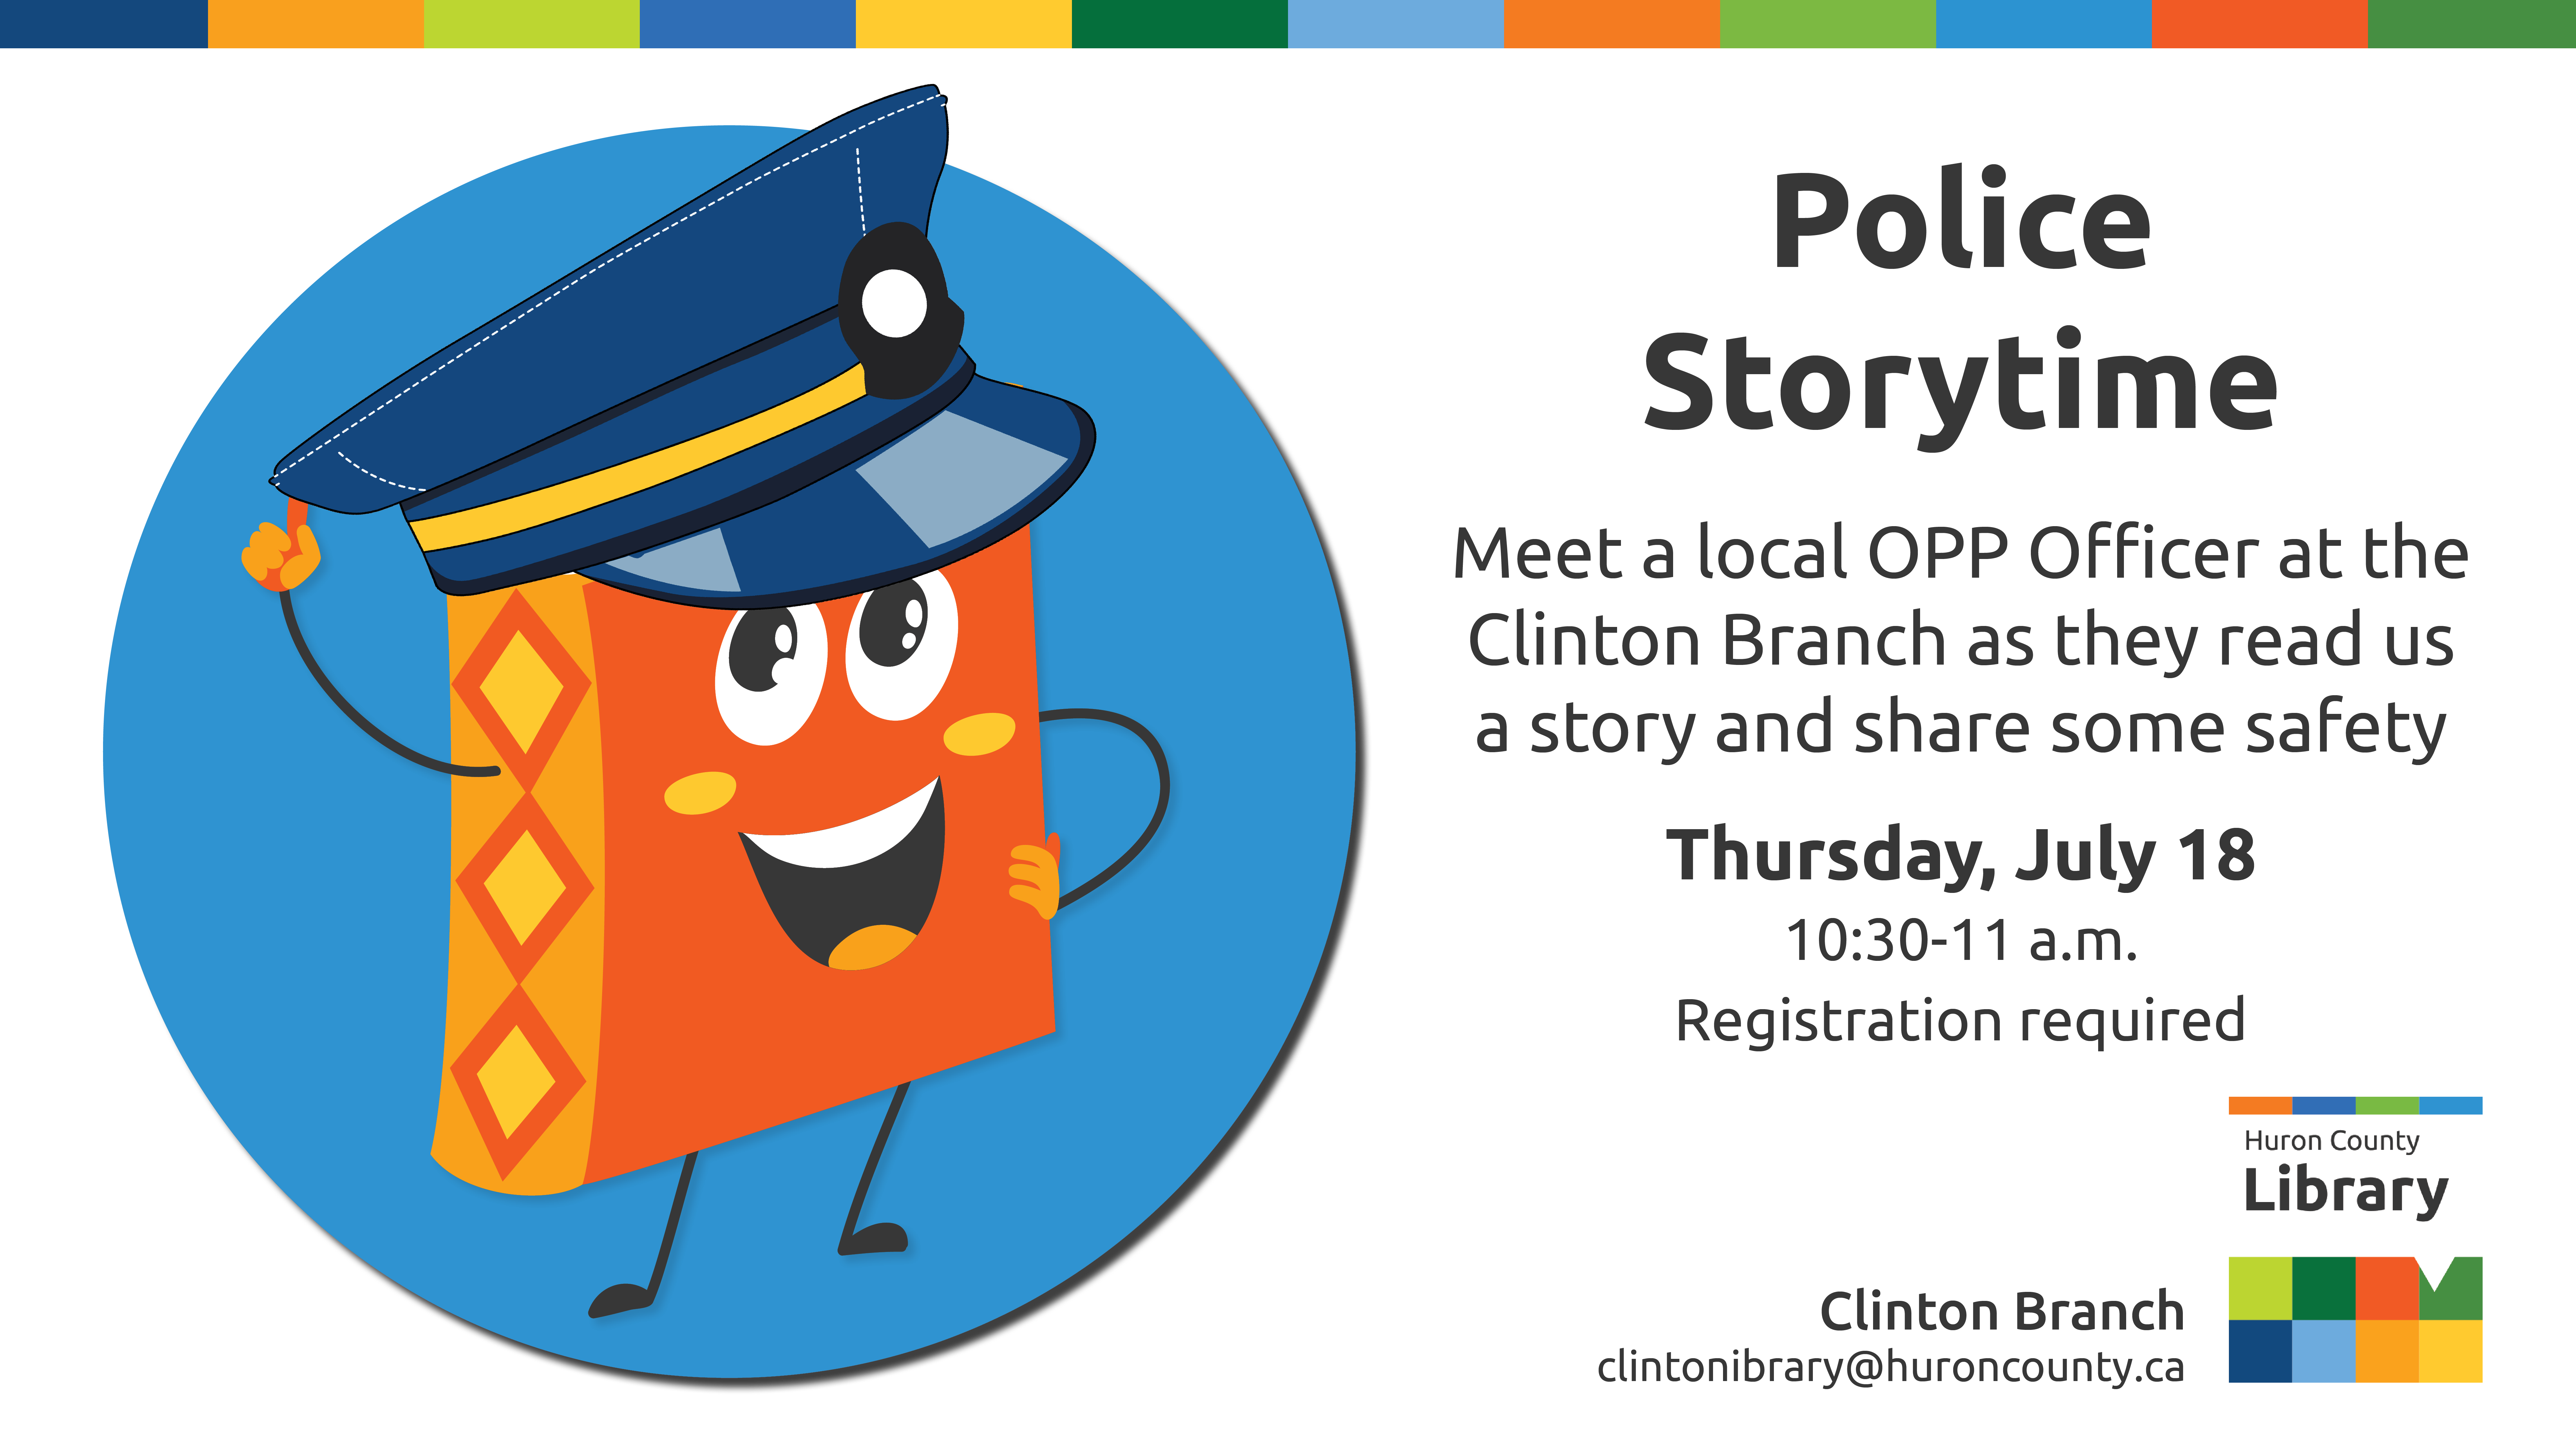 Illustration of Bob the Book wearing a police hat with text promoting police storytime at Clinton